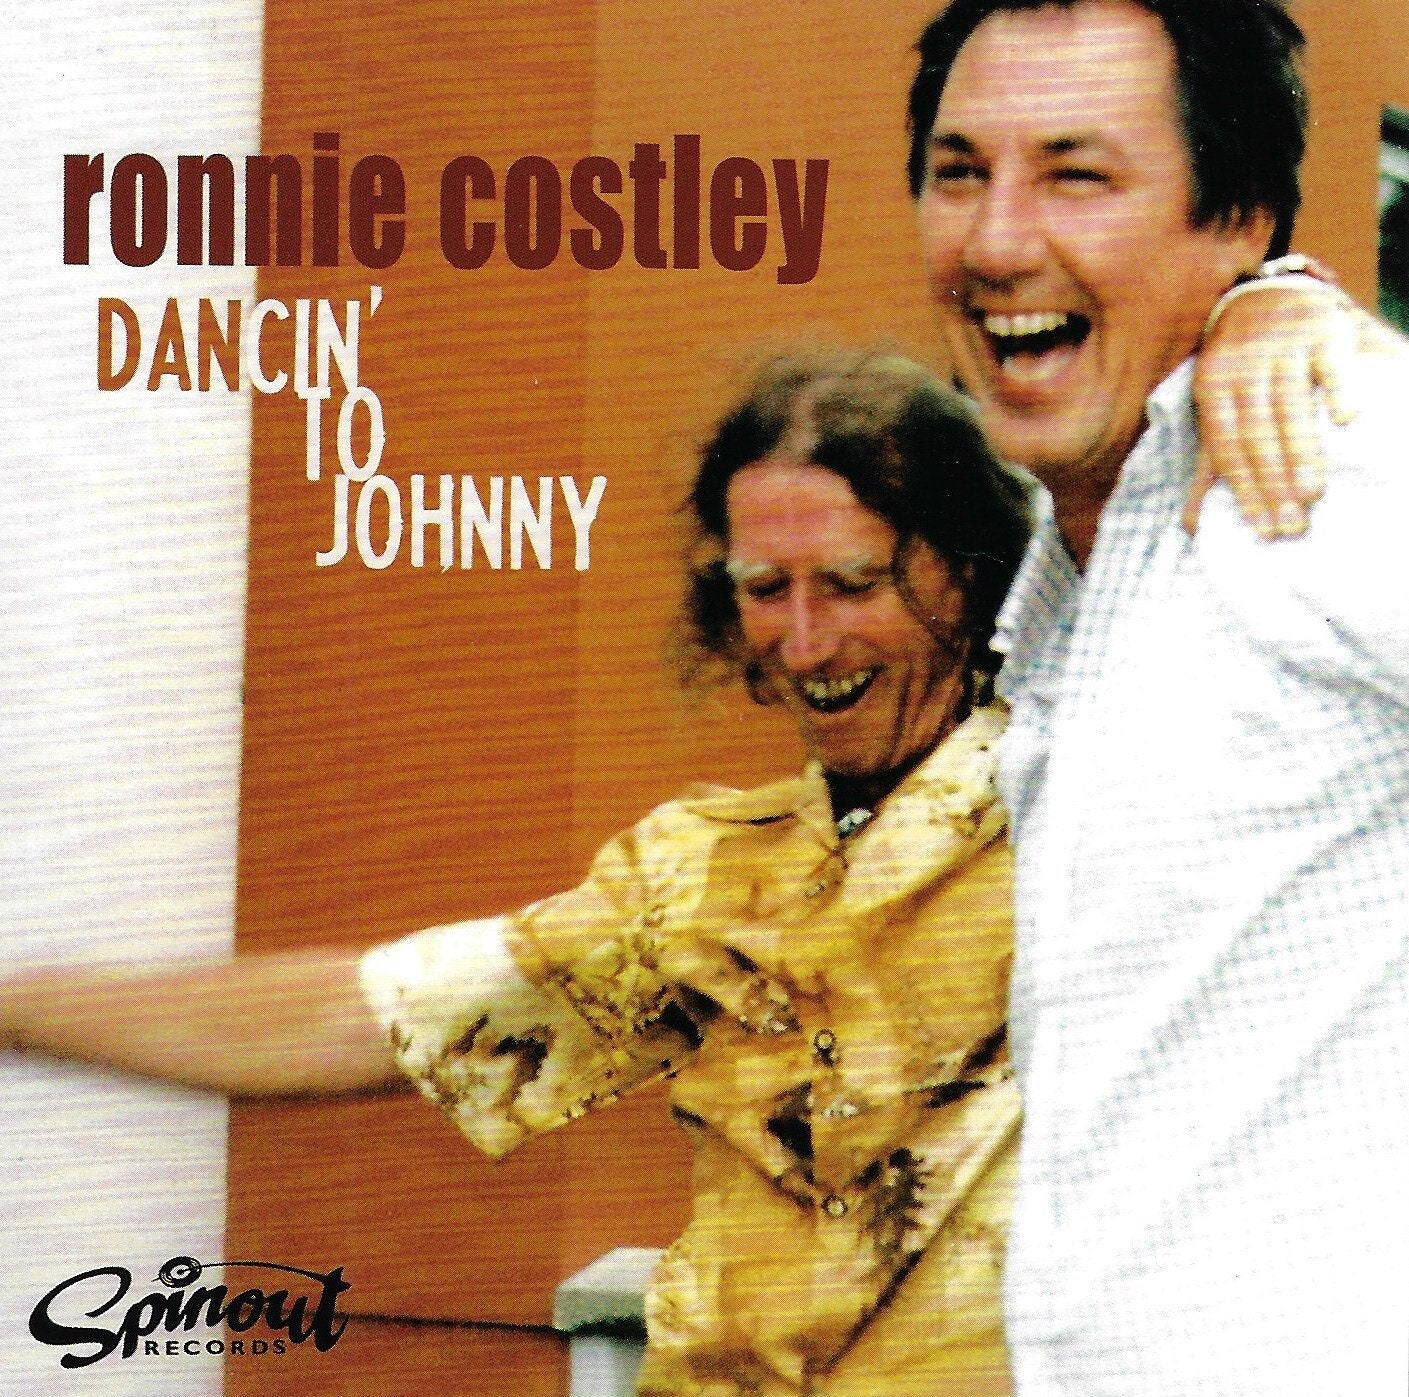 Ronnie Costley "Dancing To Johnny" CD